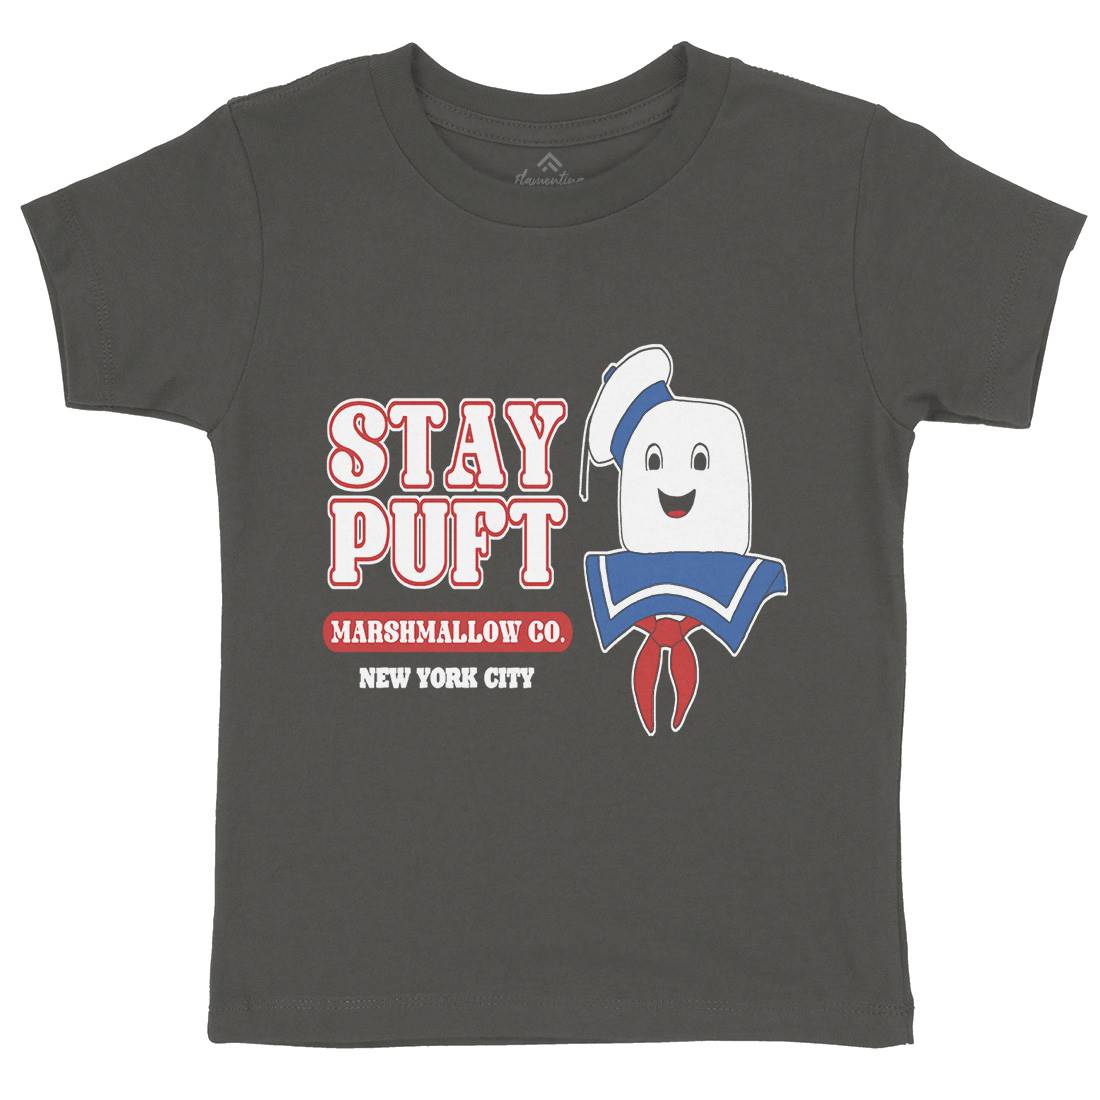 Stay Puft Co Kids Crew Neck T-Shirt Space D141